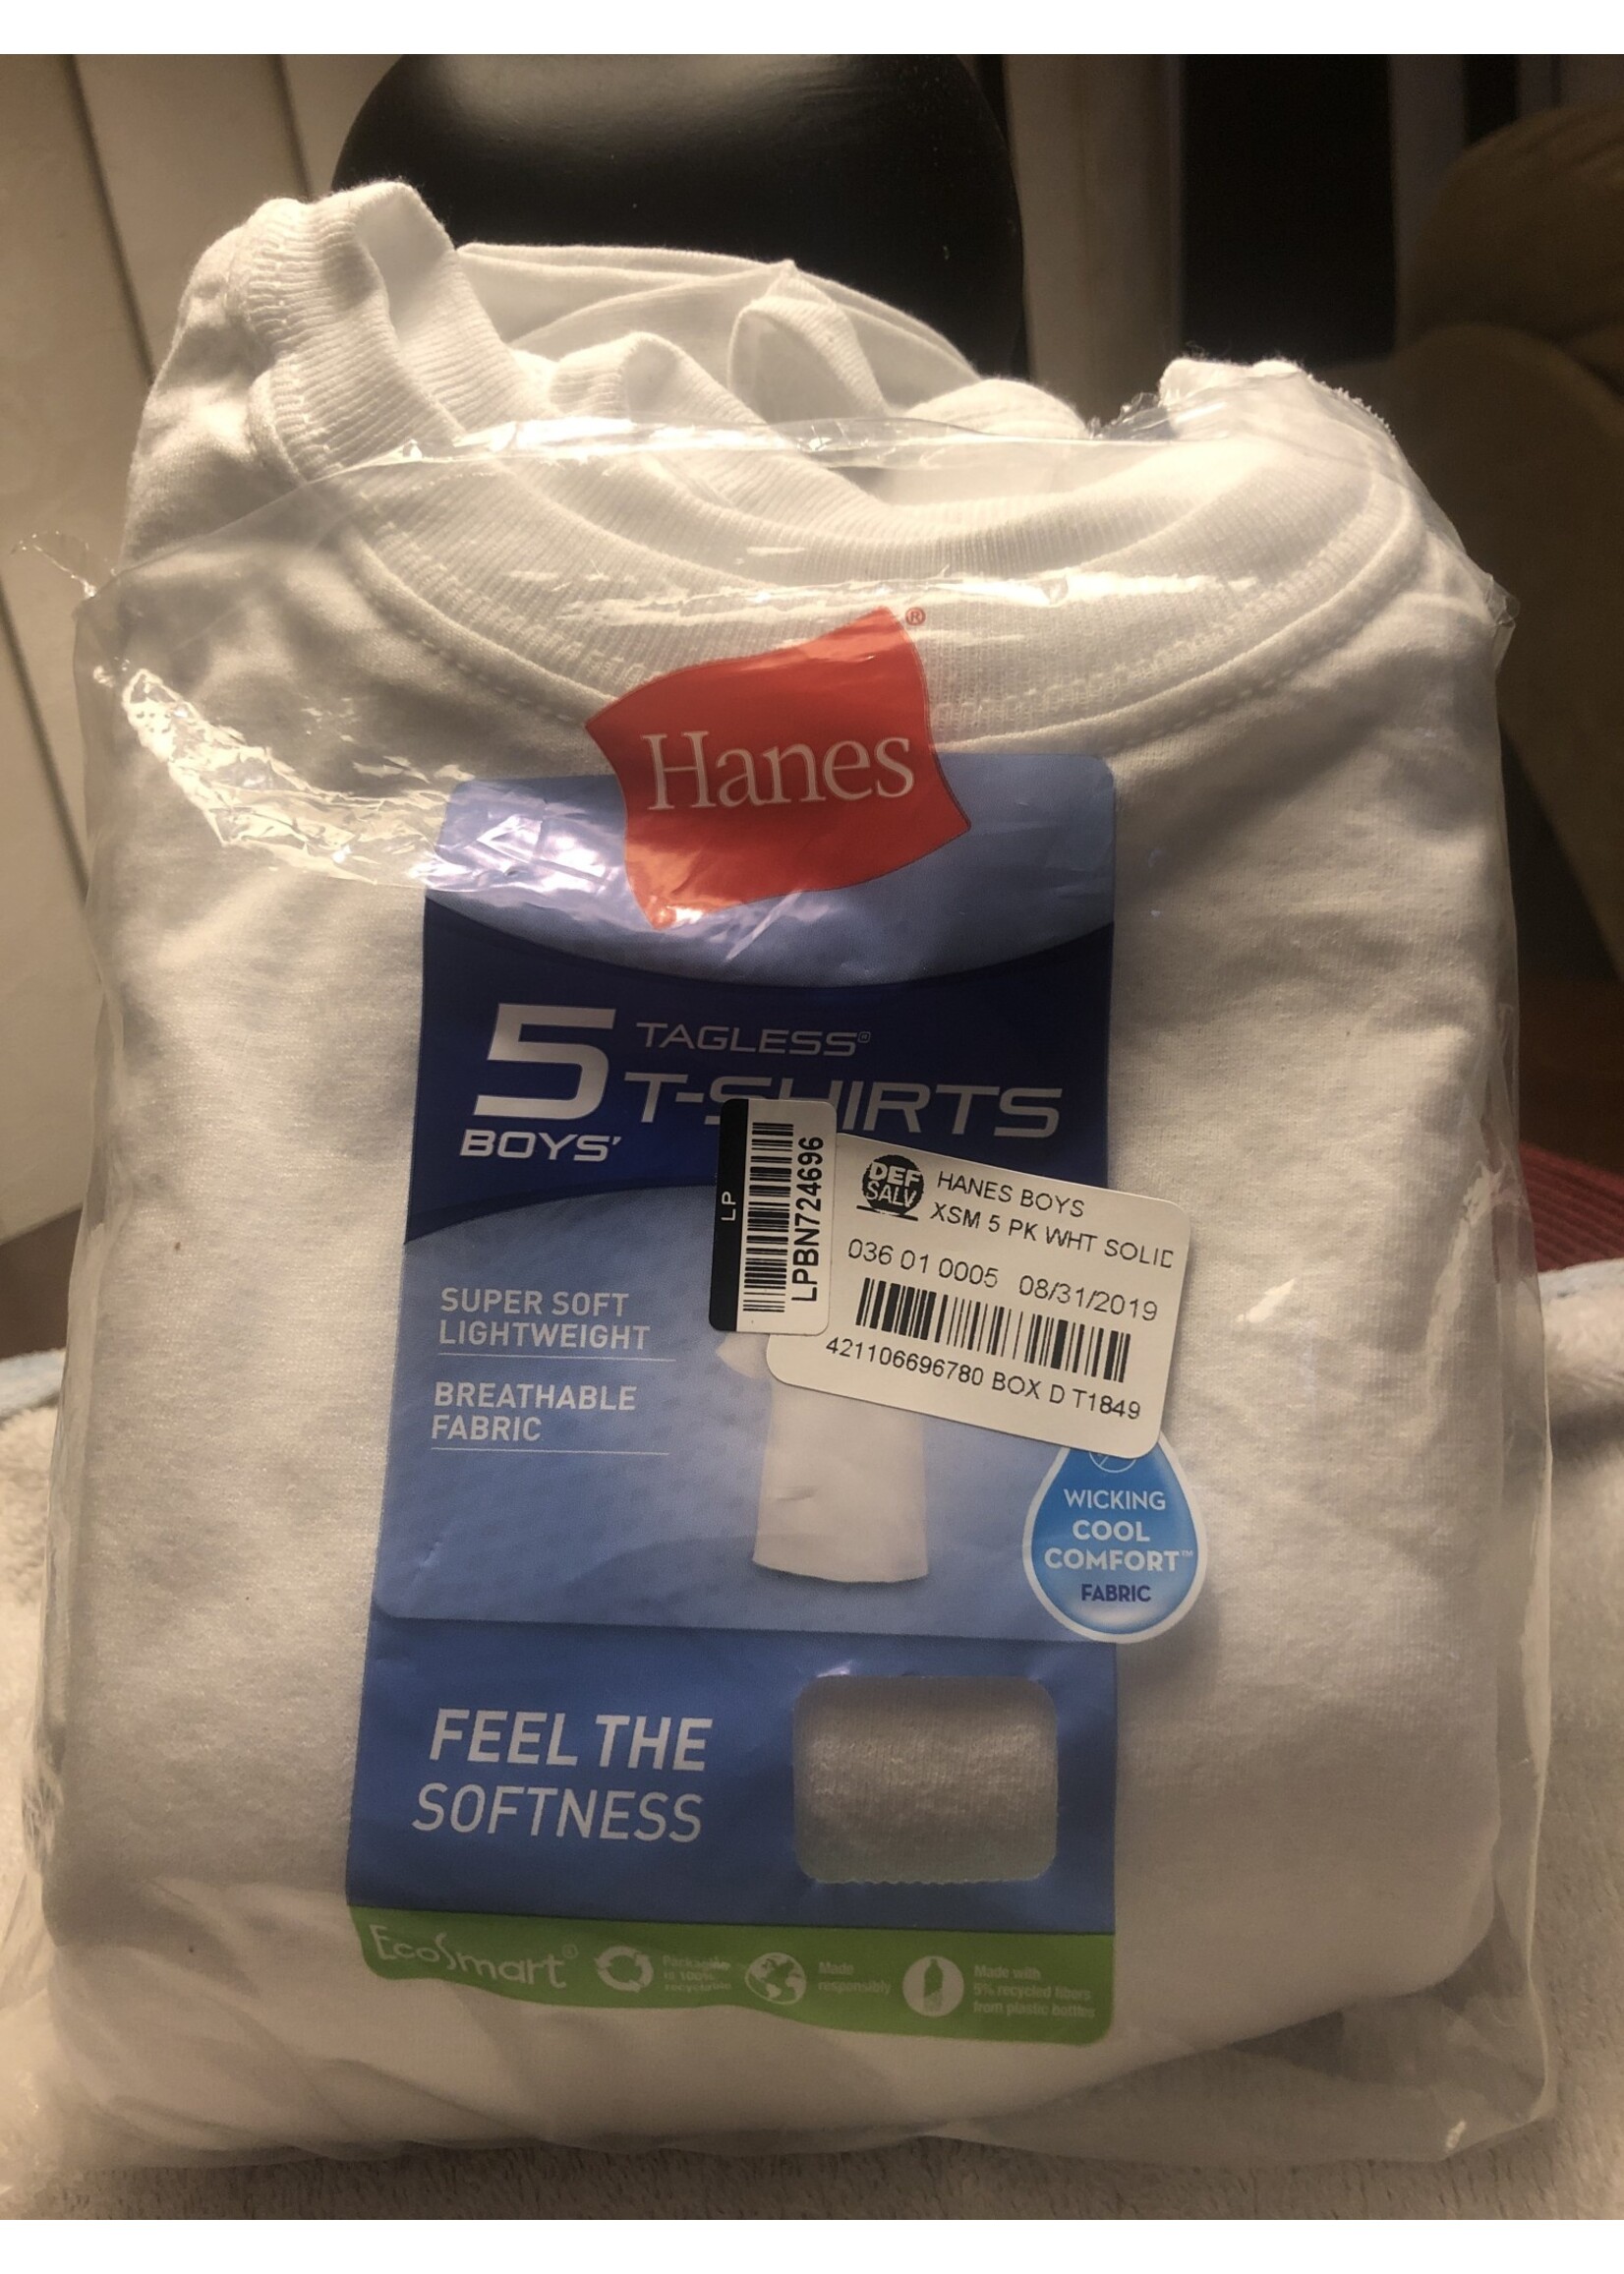 Hanes Hanes Boys Size XSm White 5-Pack Short Sleeve T-Shirts New in Open Bag